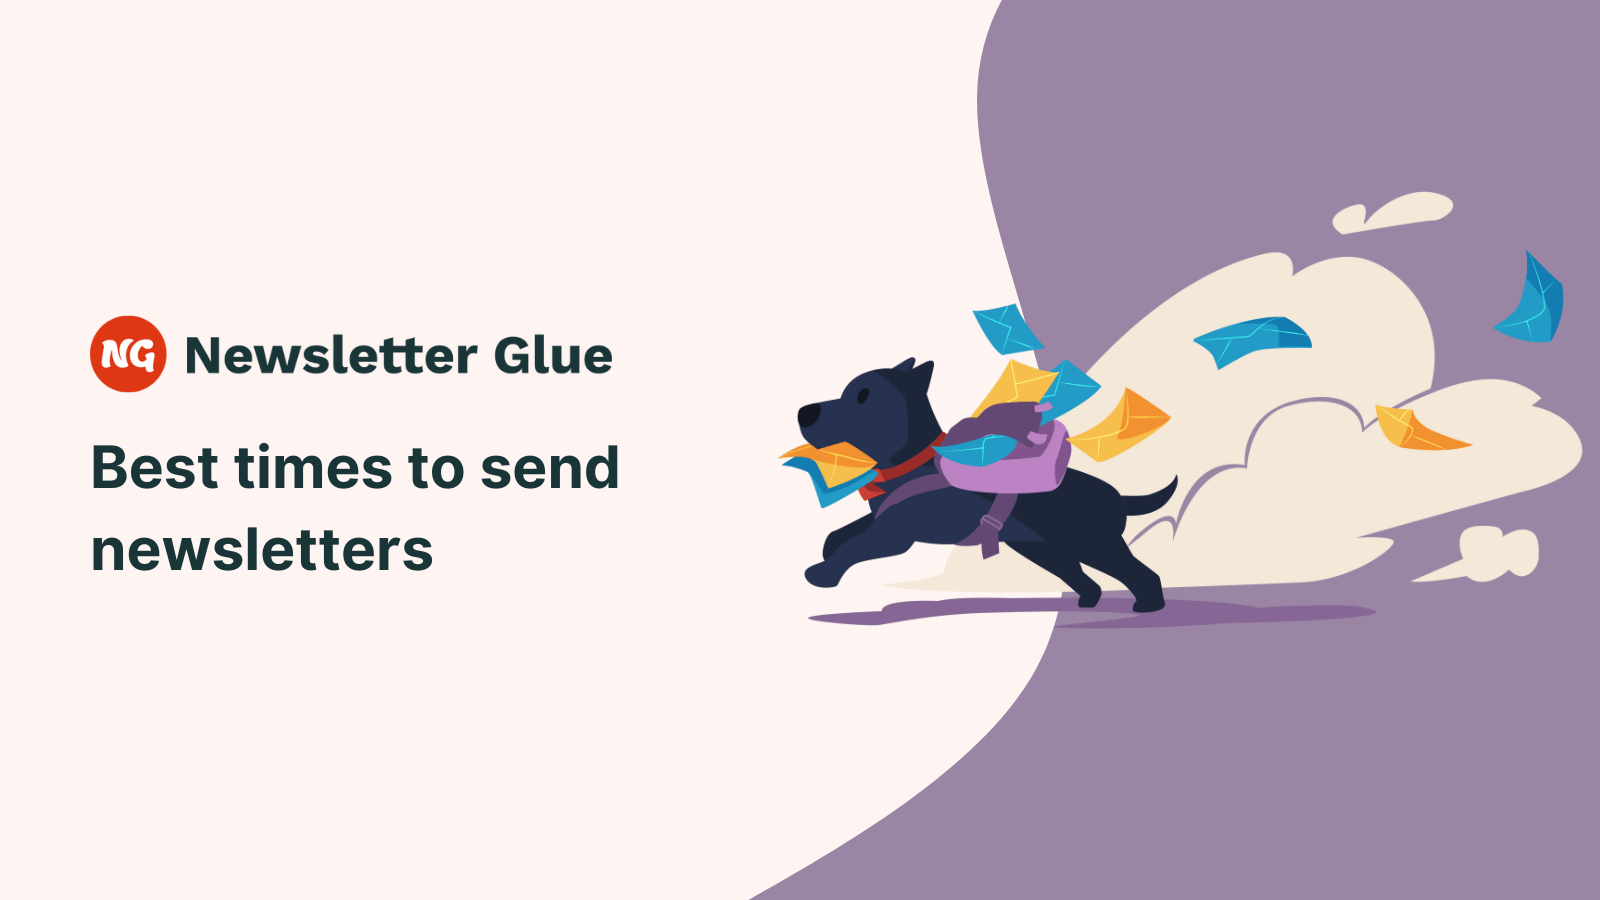 Best times to send newsletters